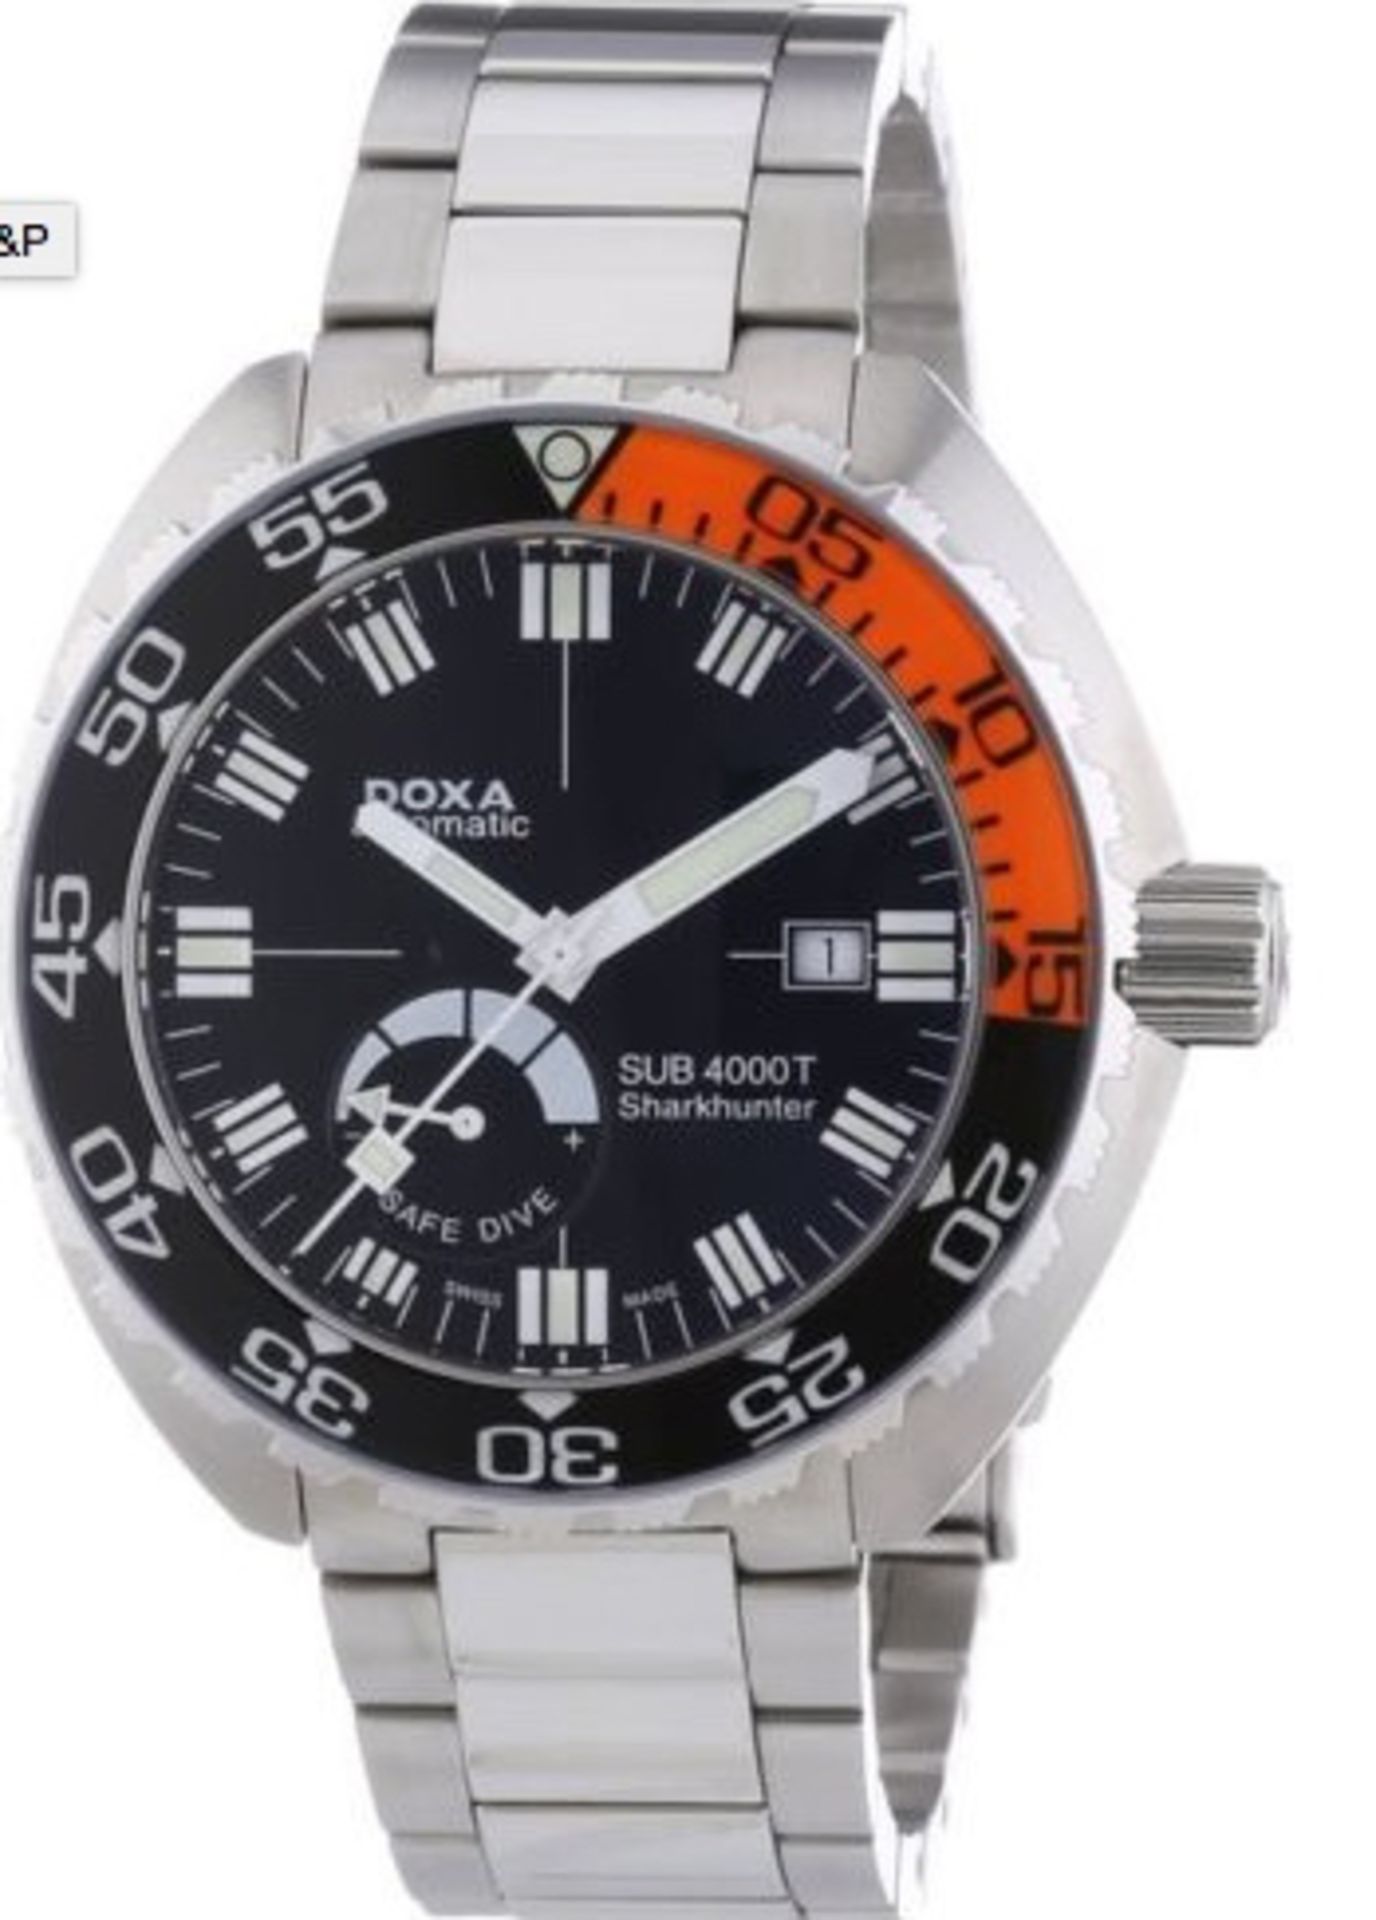 Brand New in Box - Doxa Sub 4000T Sharkhunter Sapphire Bezel Men's Automatic Watch with Black Dial - Image 2 of 5